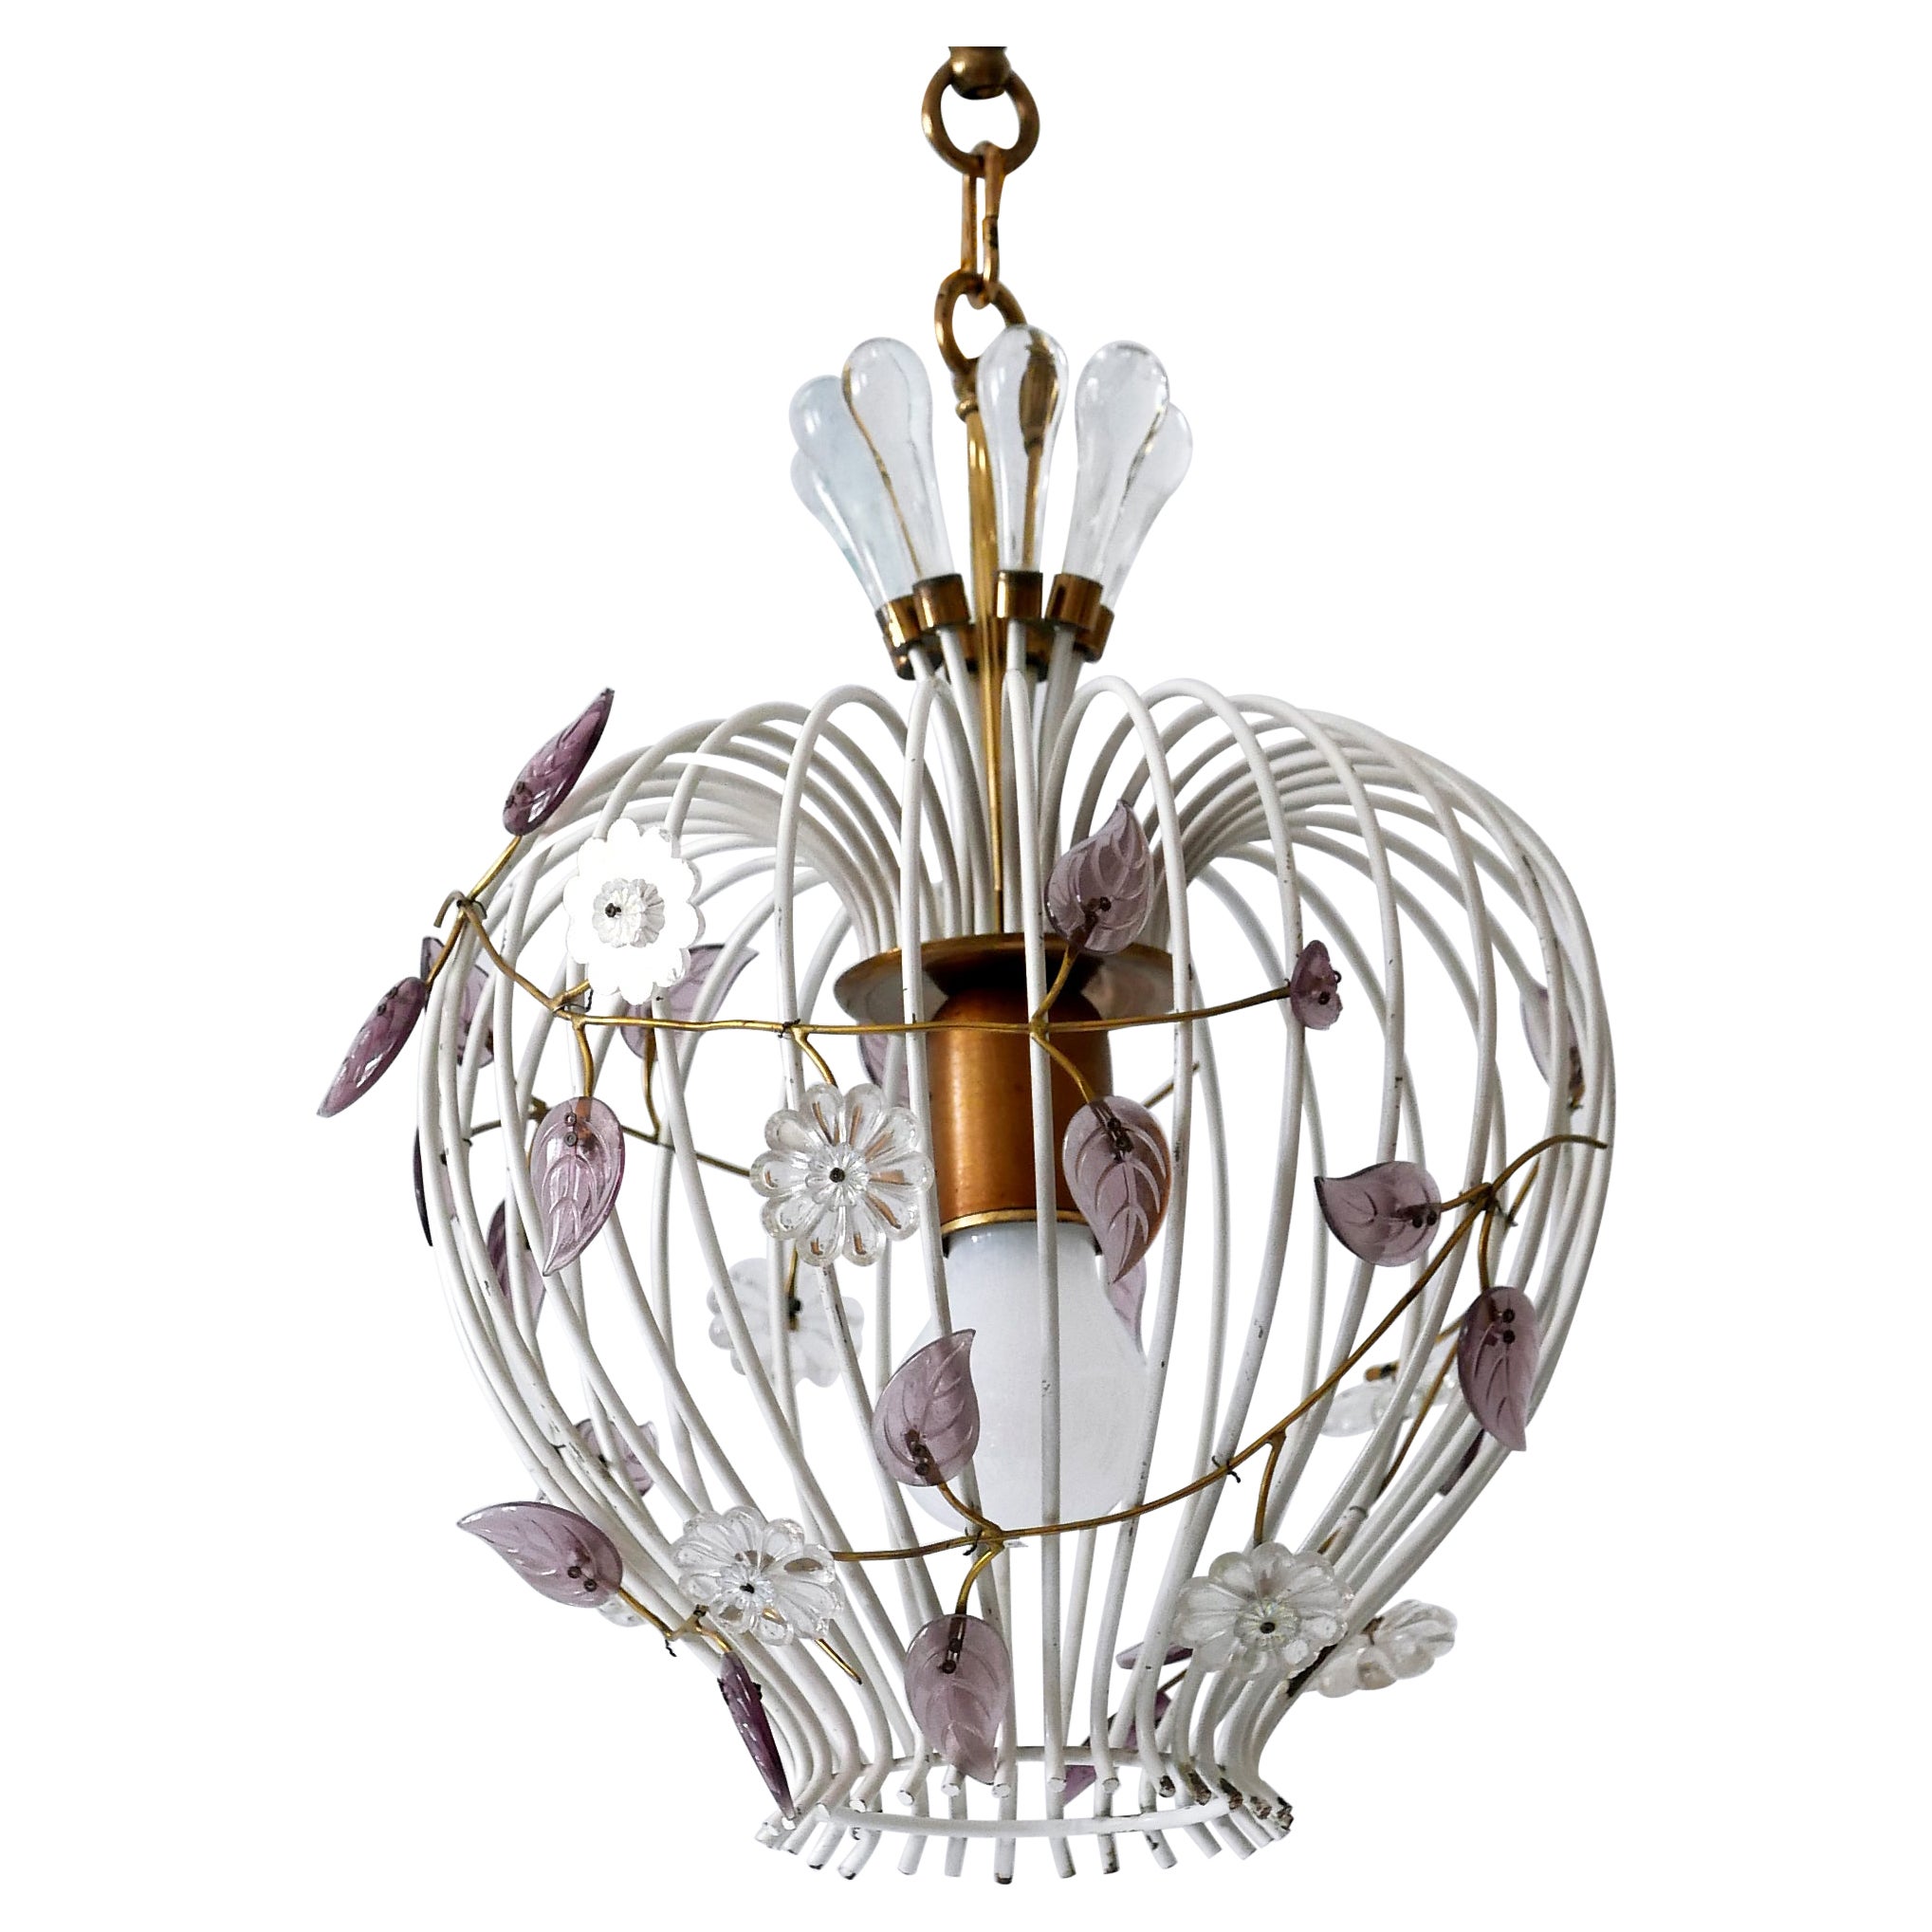 Lovely Mid-Century Modern Birdcage Pendant Lamp or Chandelier Germany 1950s For Sale